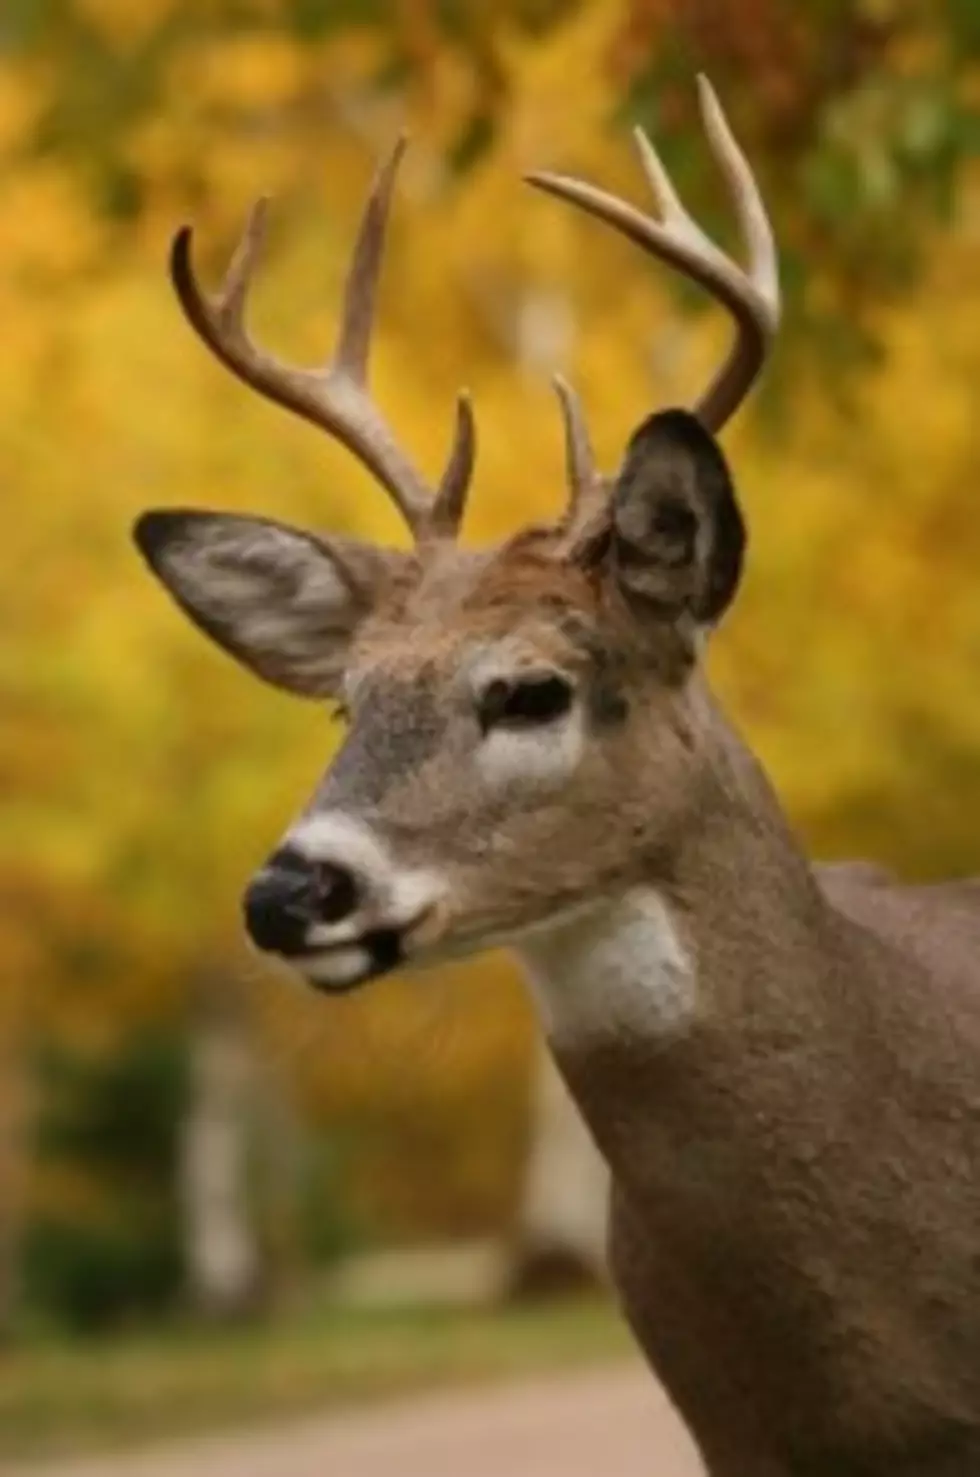 Car/Deer Collisions on the Rise on New York Roads